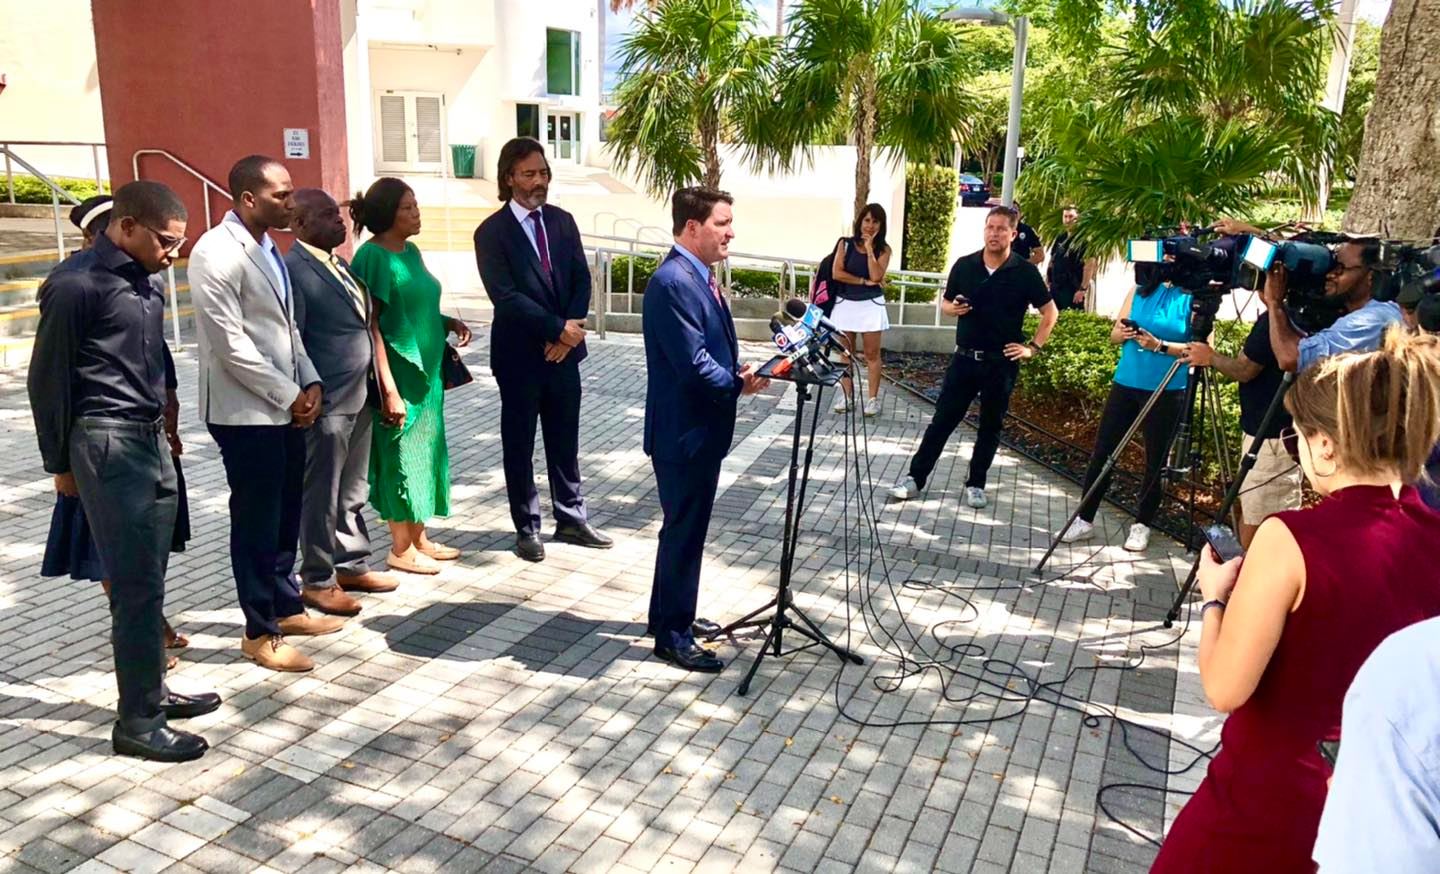 Press Conference - Miami Beach Drowning Case - Law Firm Public Relations